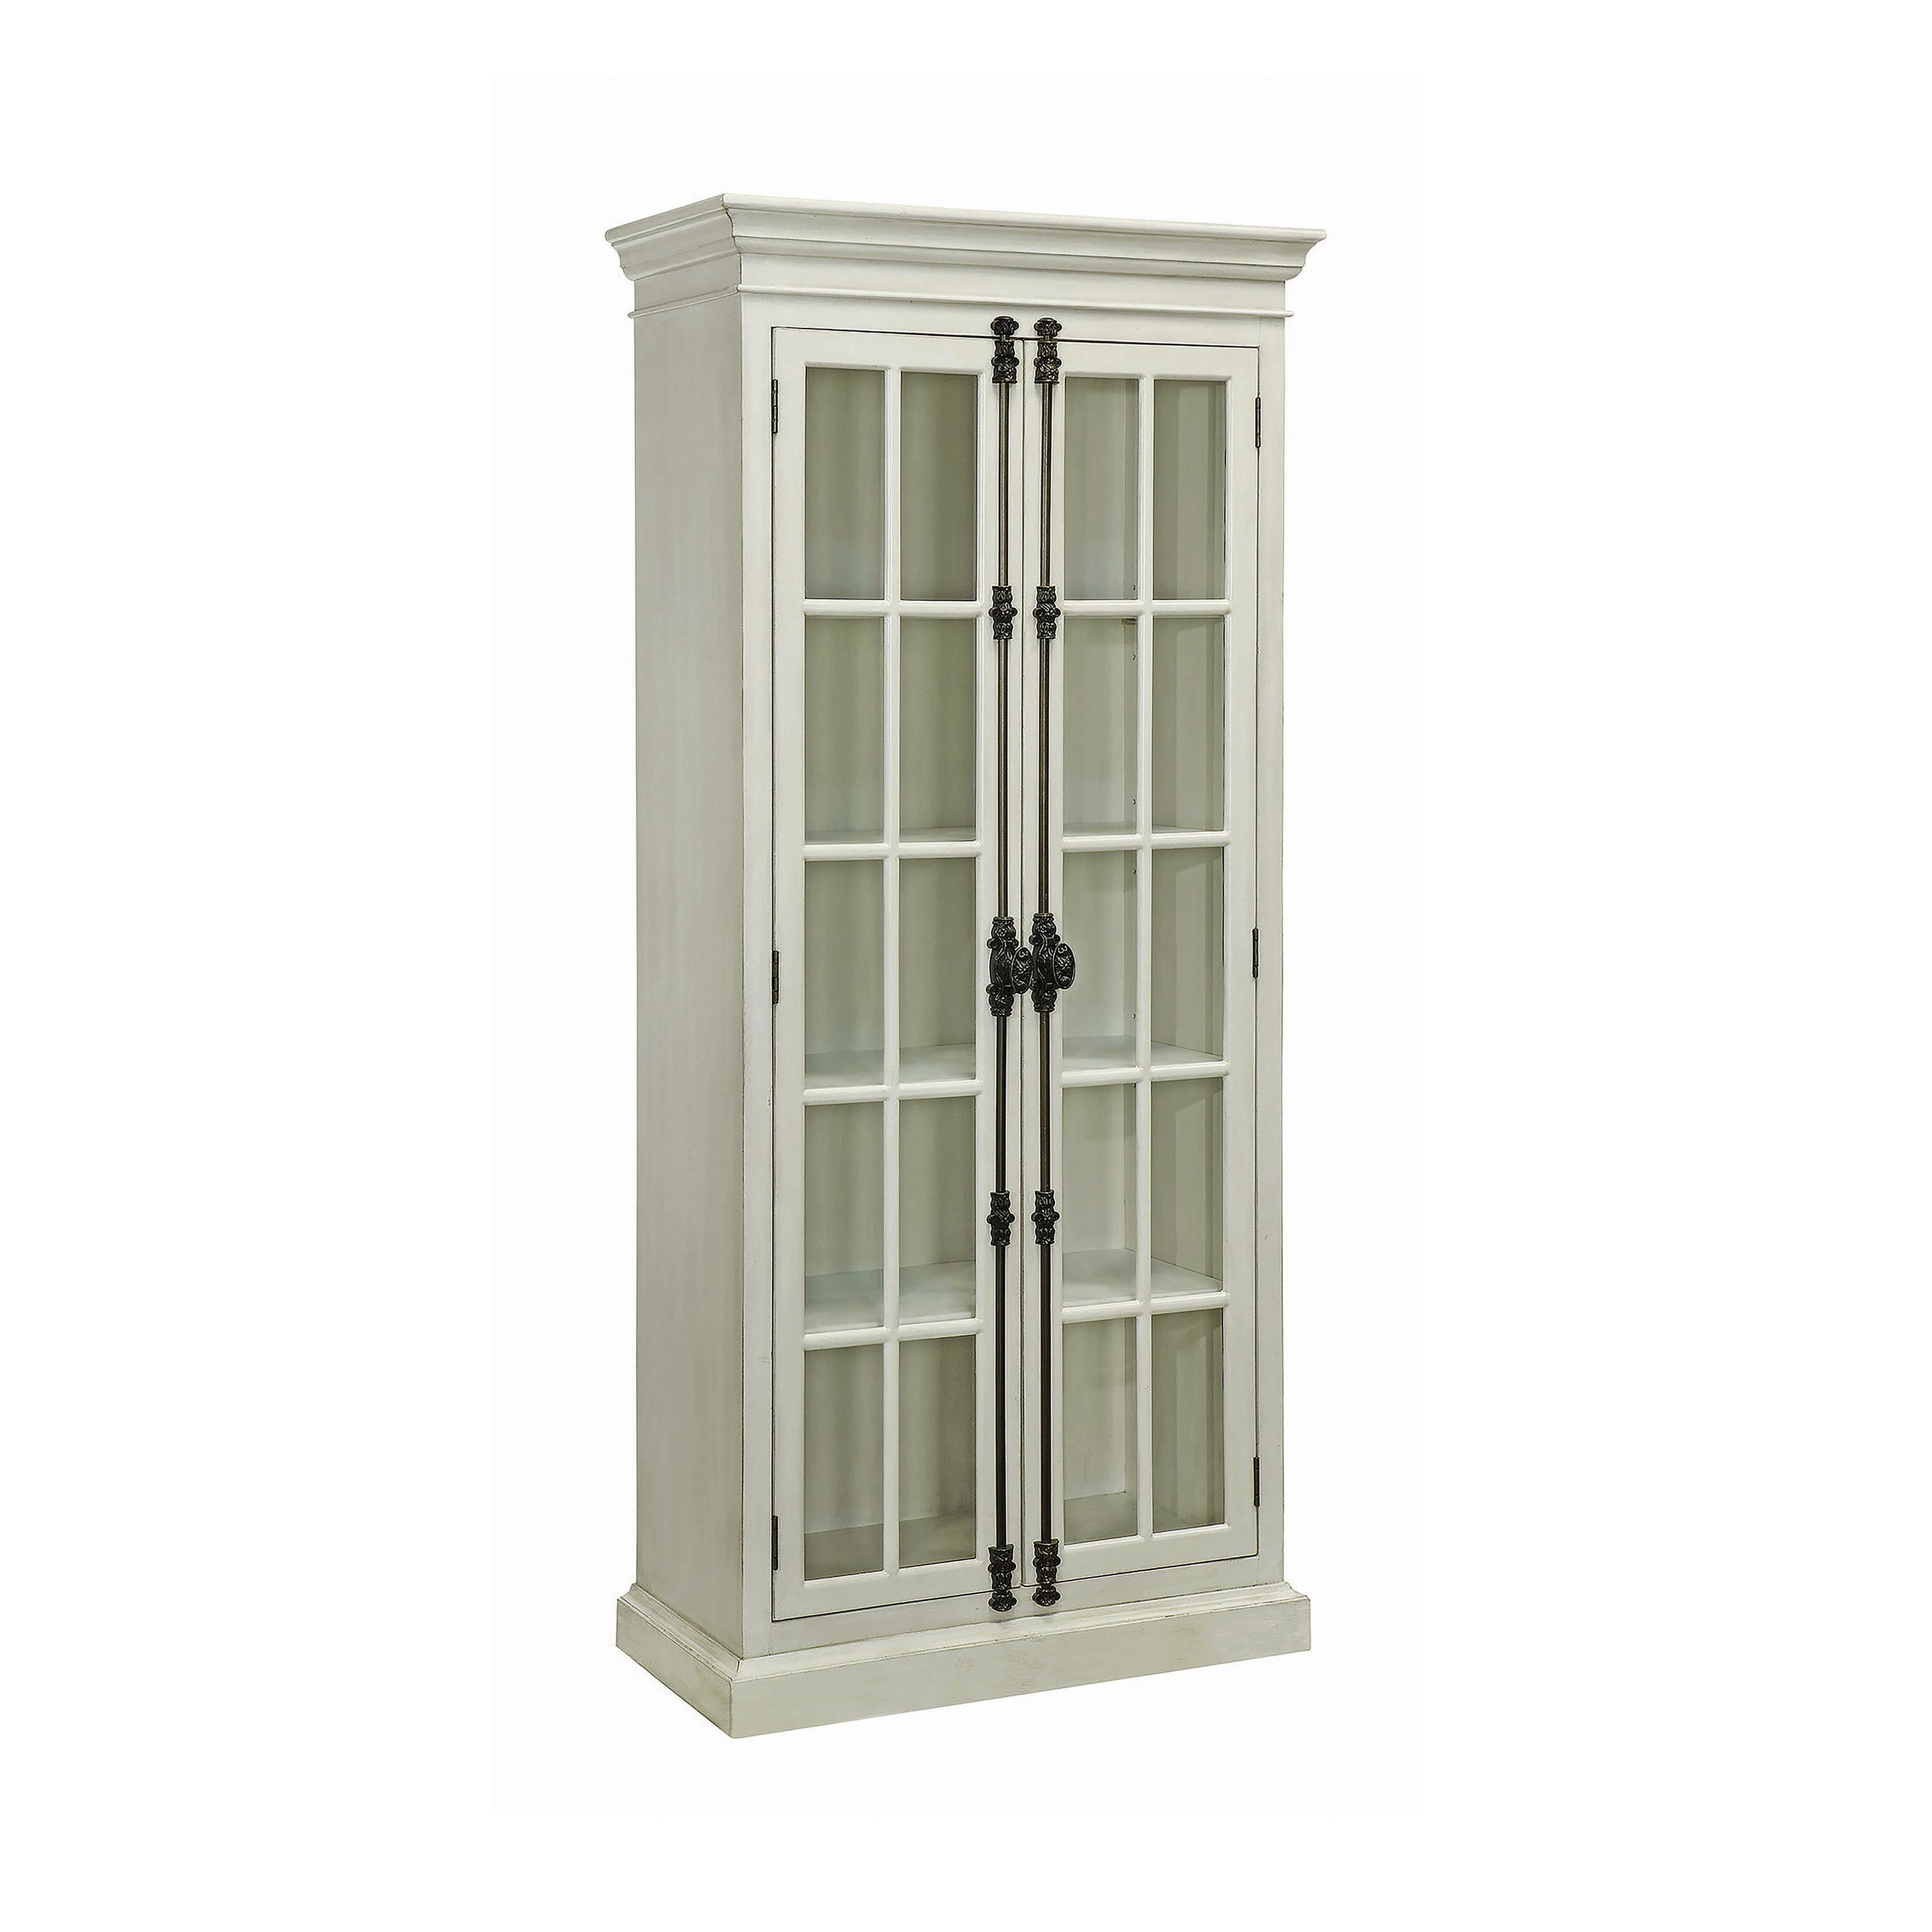 Transitional Cabinet 910187 910187 in Antique White 